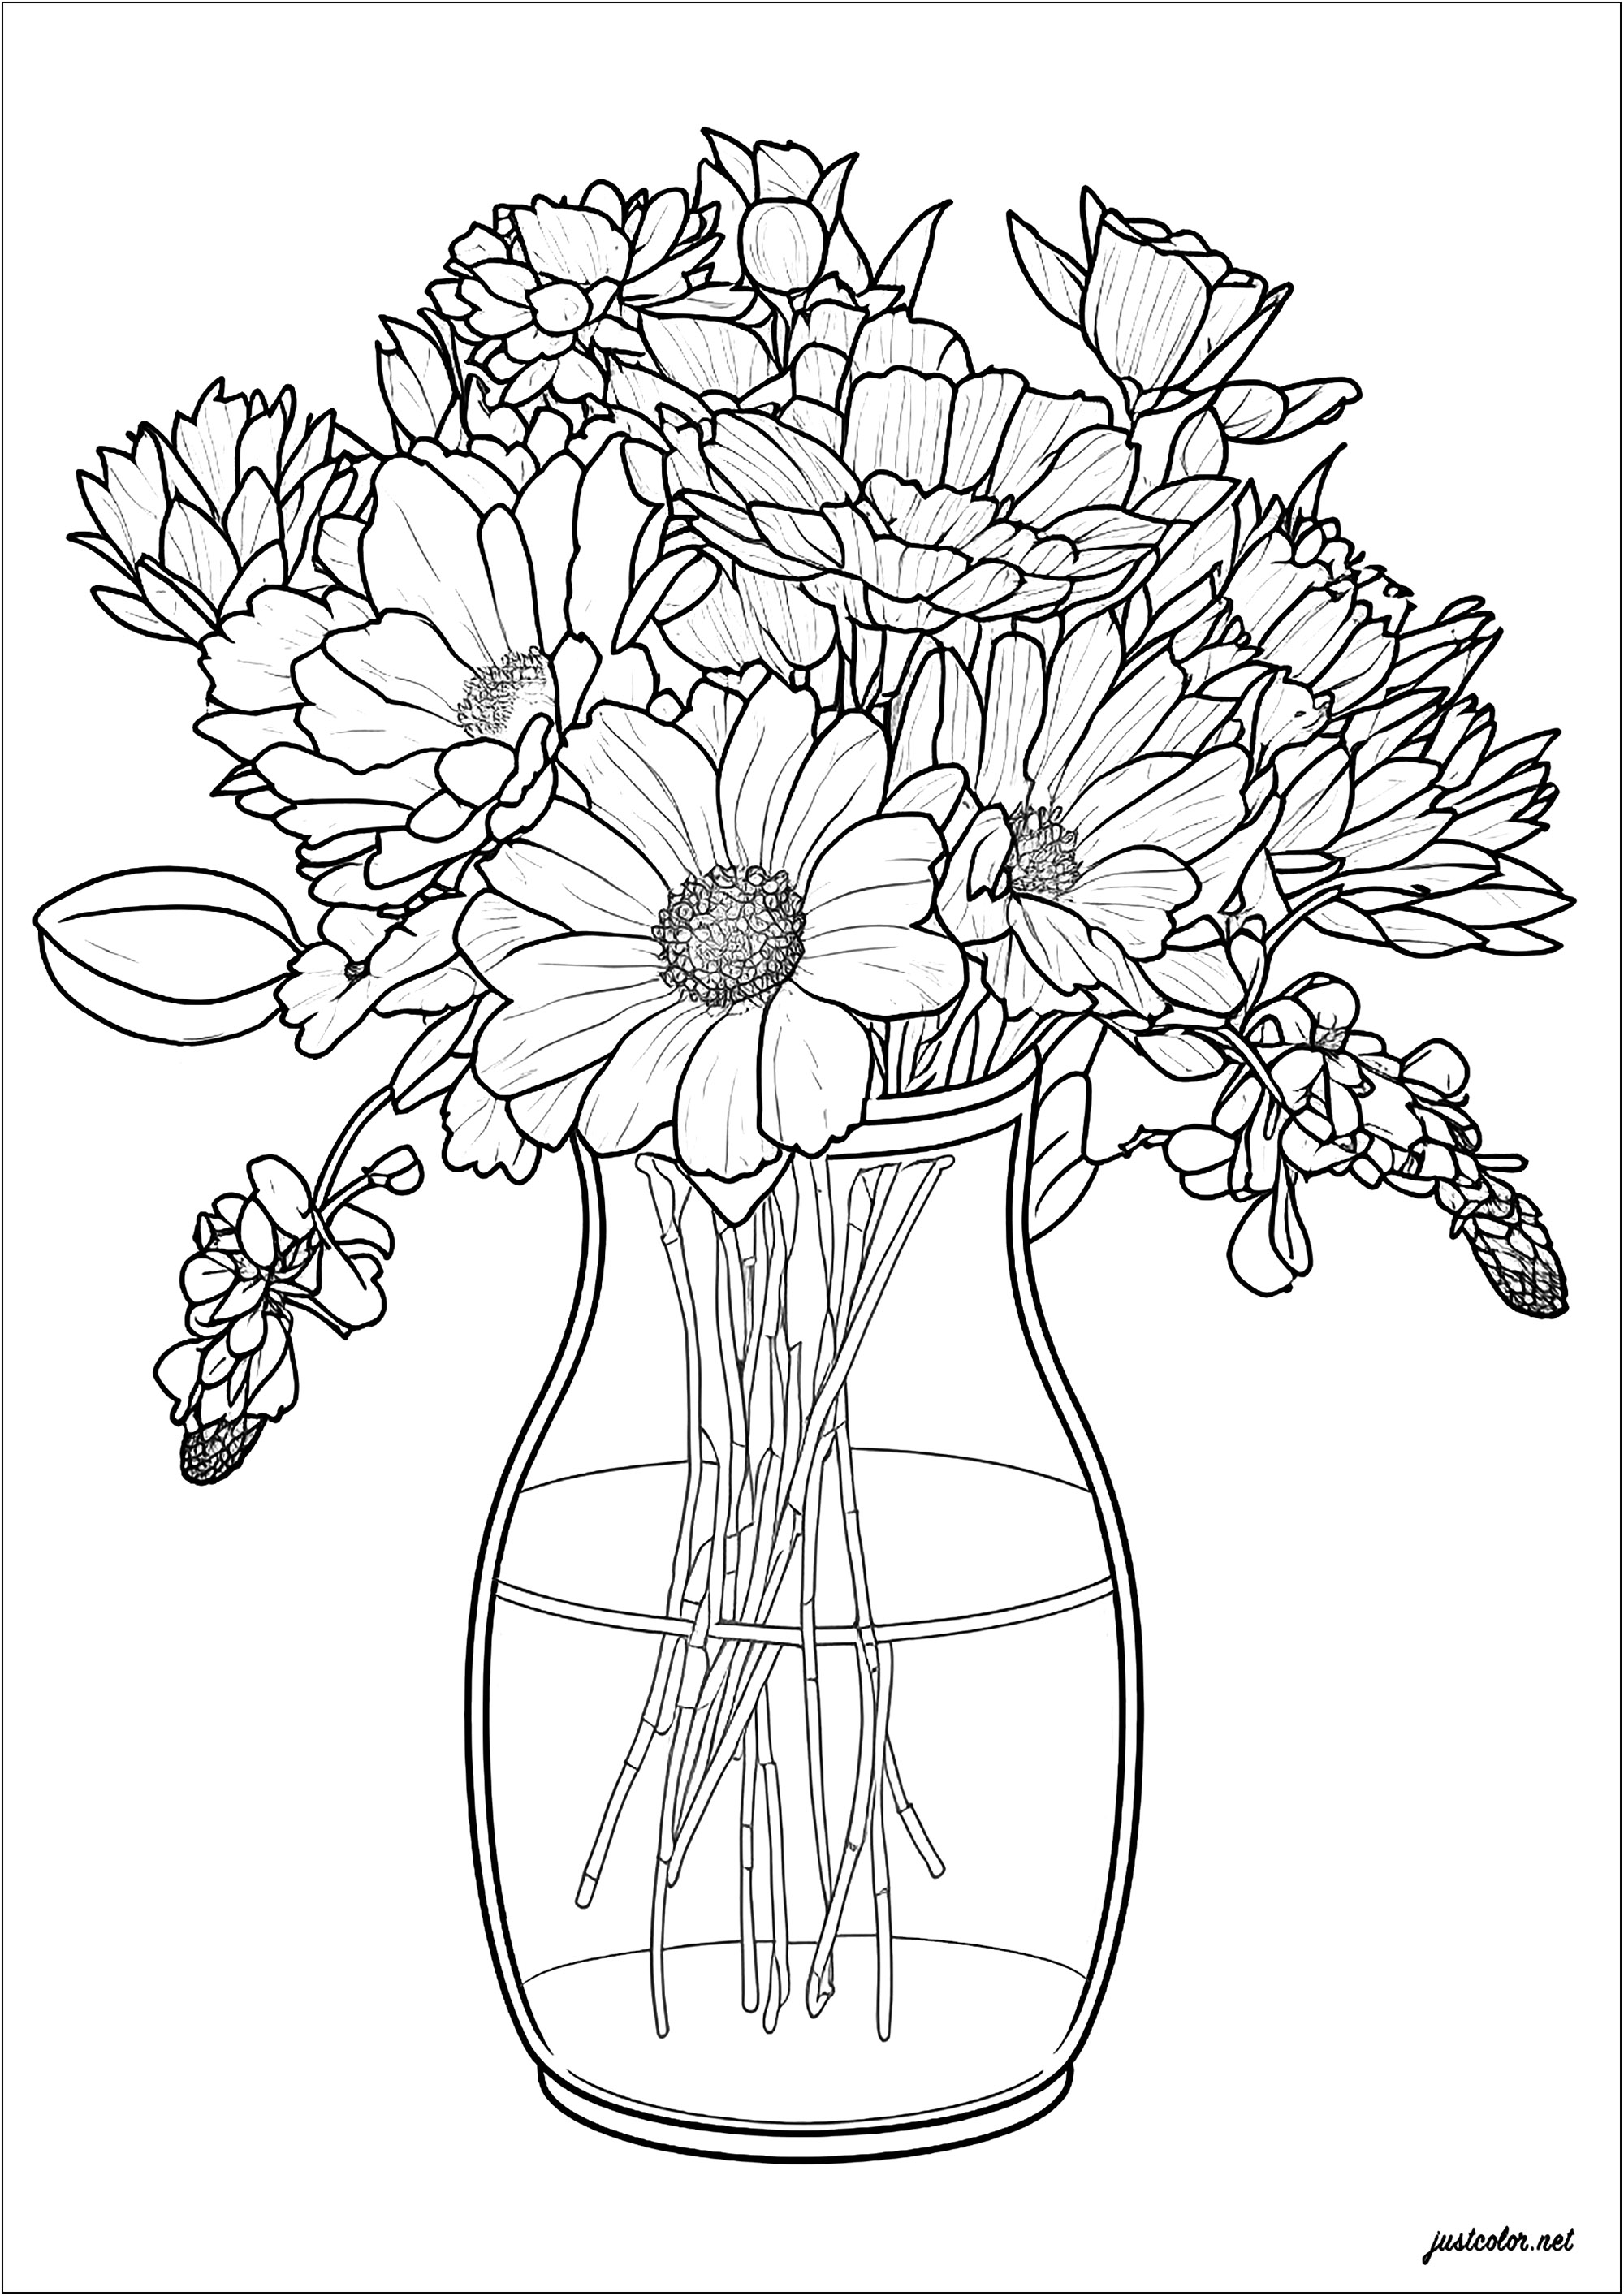 Vase and delicate flowers. A beautiful design with fine lines, representing beautiful flowers elegantly distributed in a glass vase.
